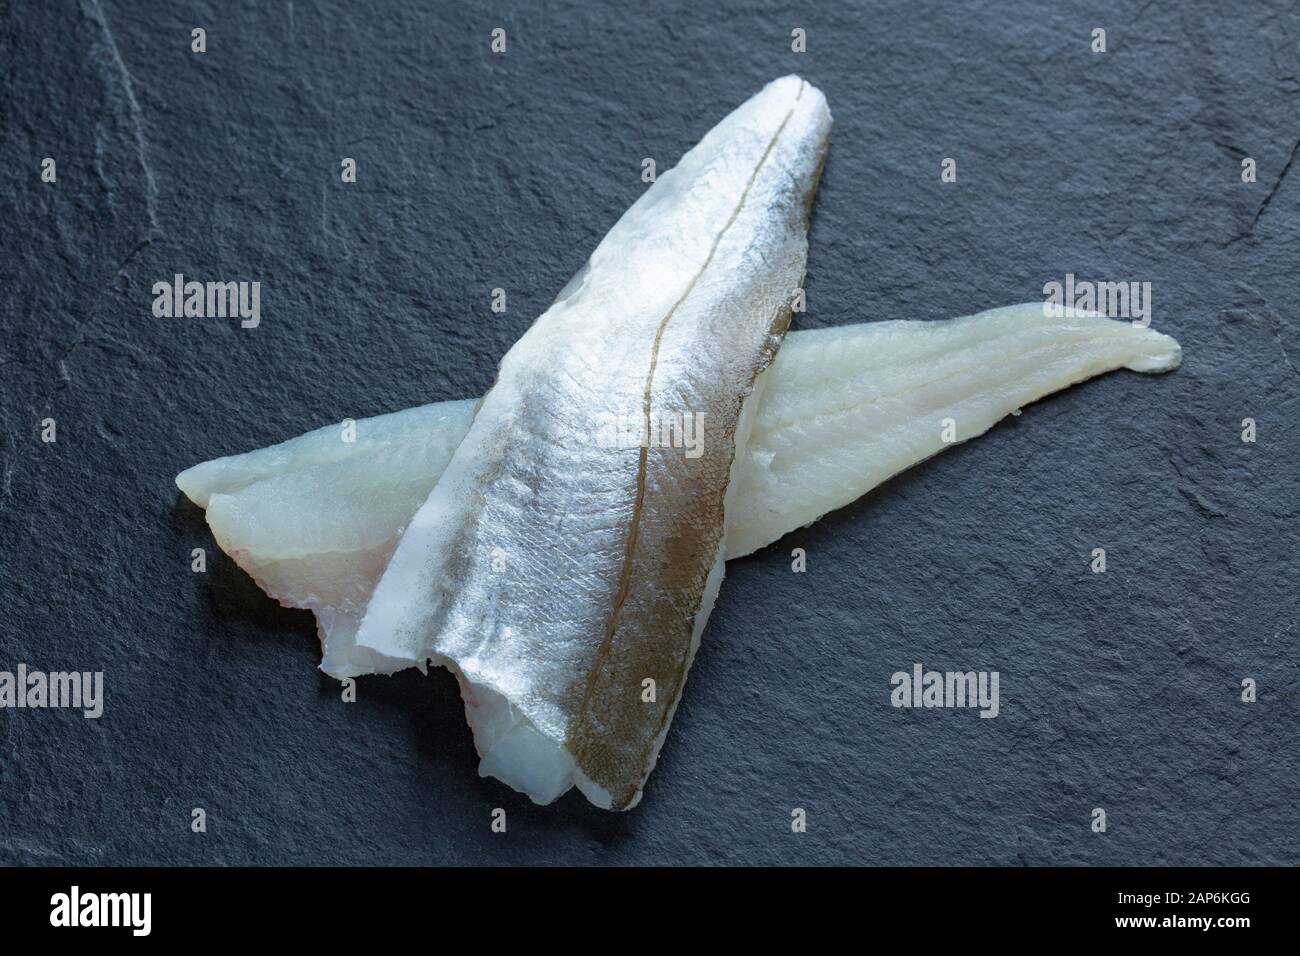 Two raw whiting fillet, Merlangius merlangus, from a whiting caught in the English Channel on rod and line from a boat. The fillets show the flesh and Stock Photo